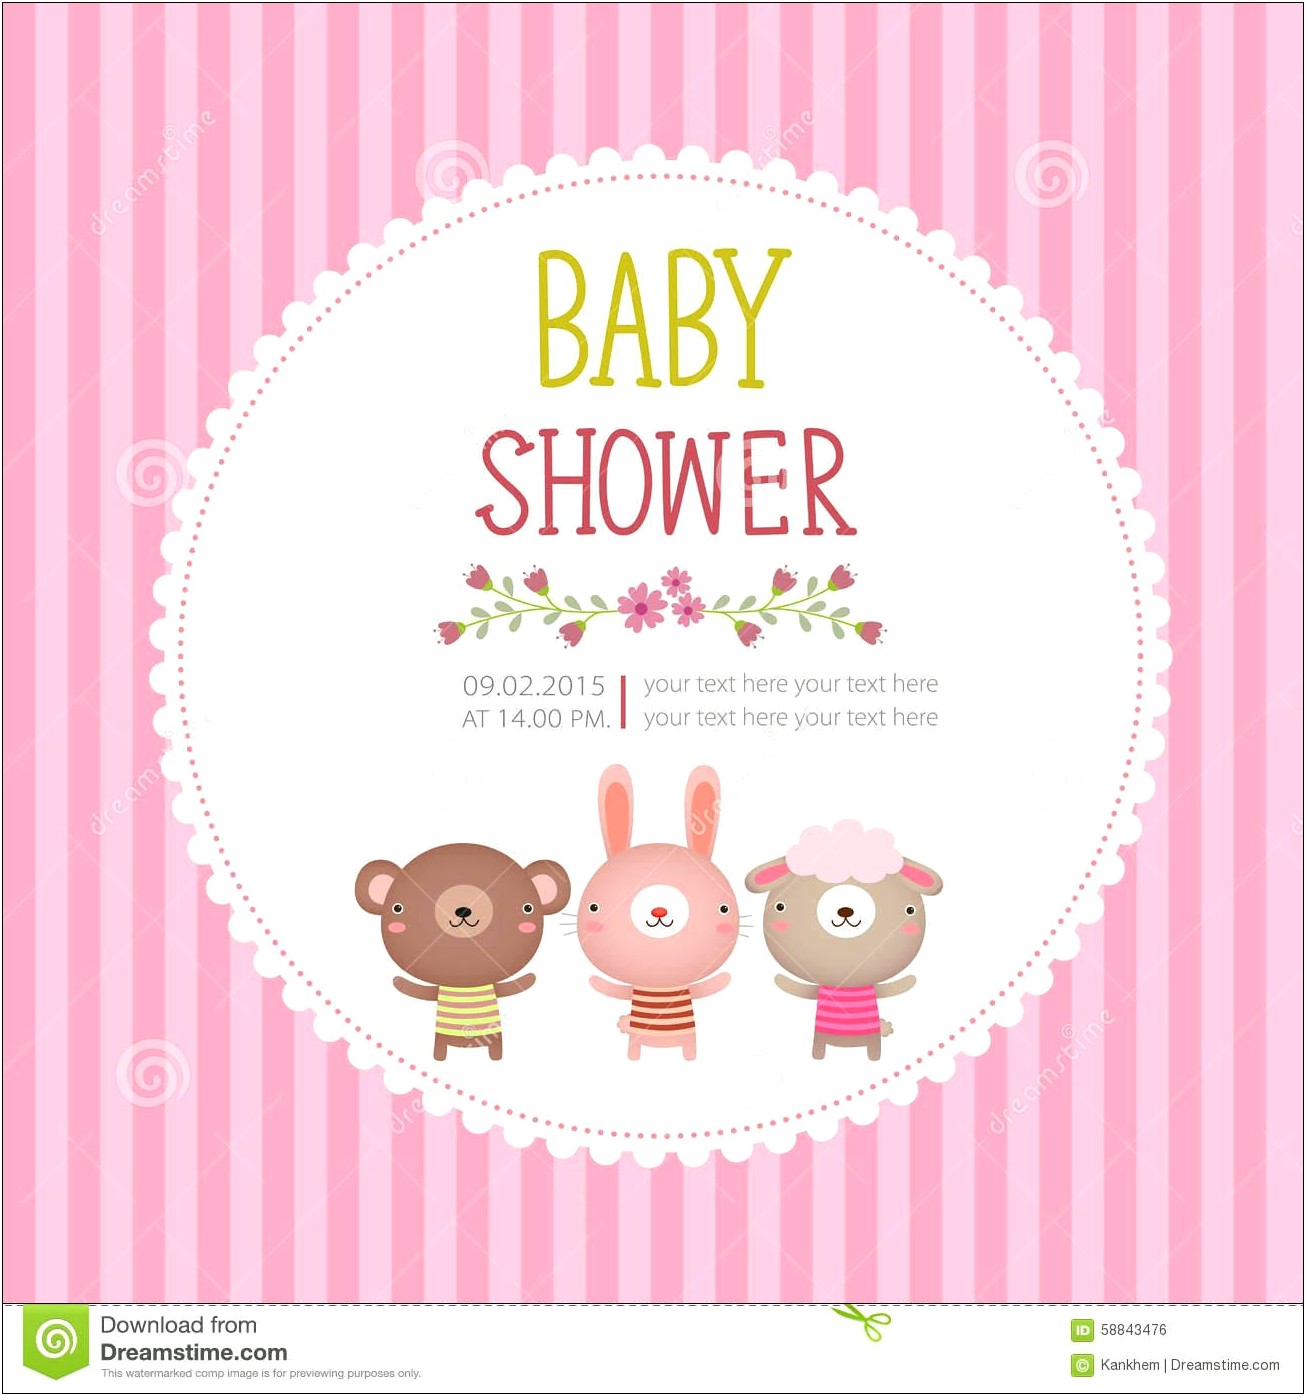 Free Baby Shower Invite Template For Email